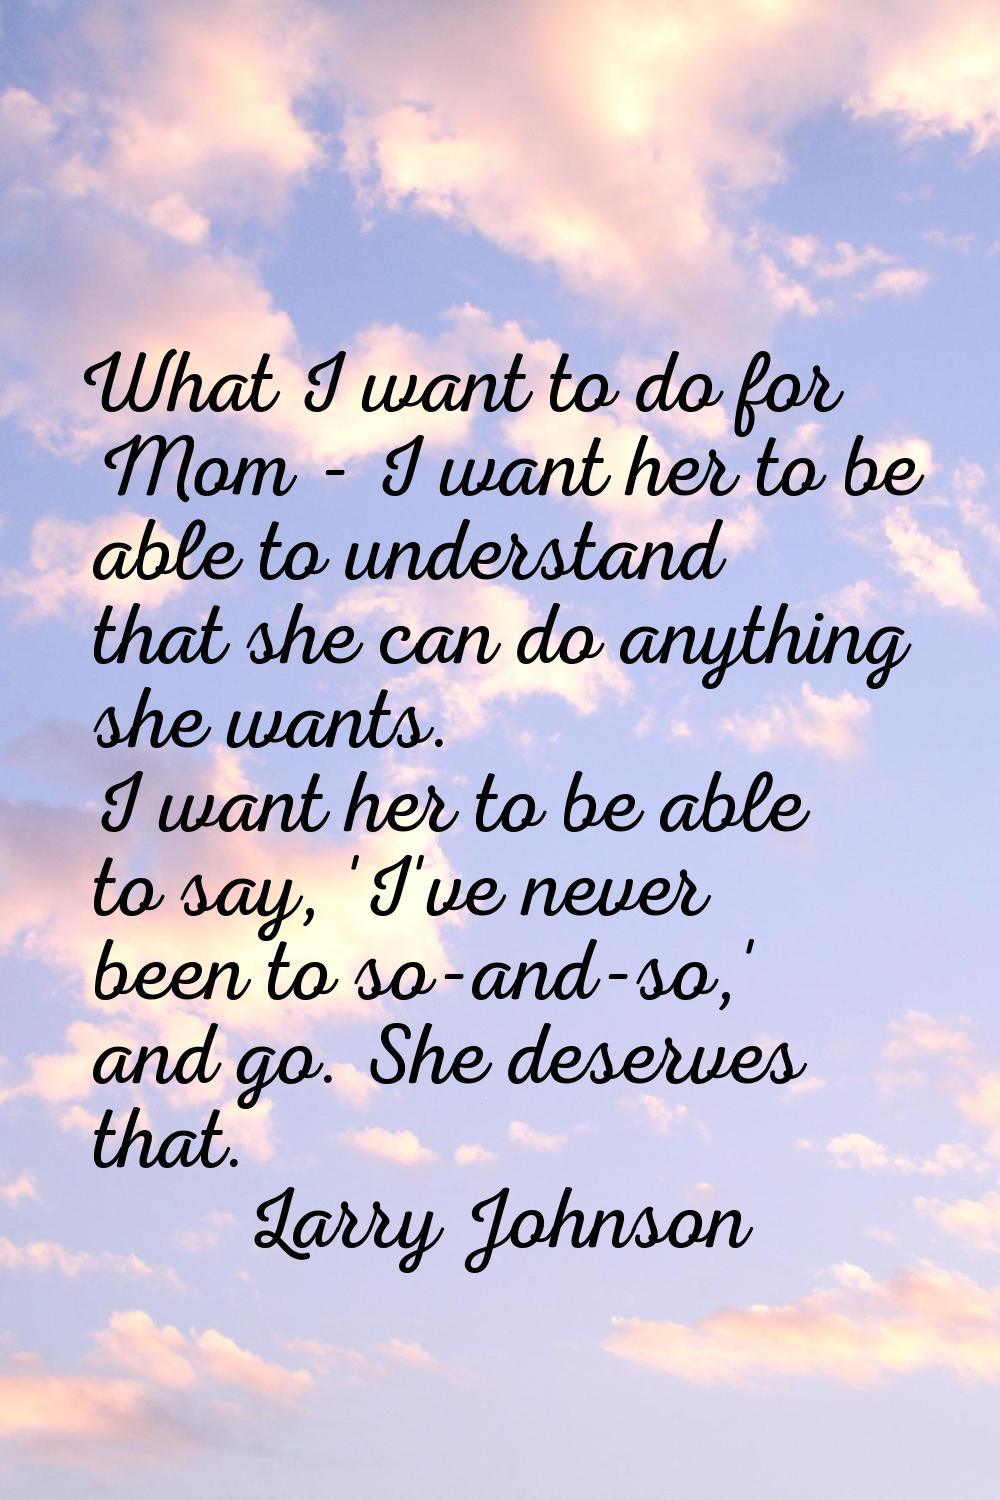 What I want to do for Mom - I want her to be able to understand that she can do anything she wants.